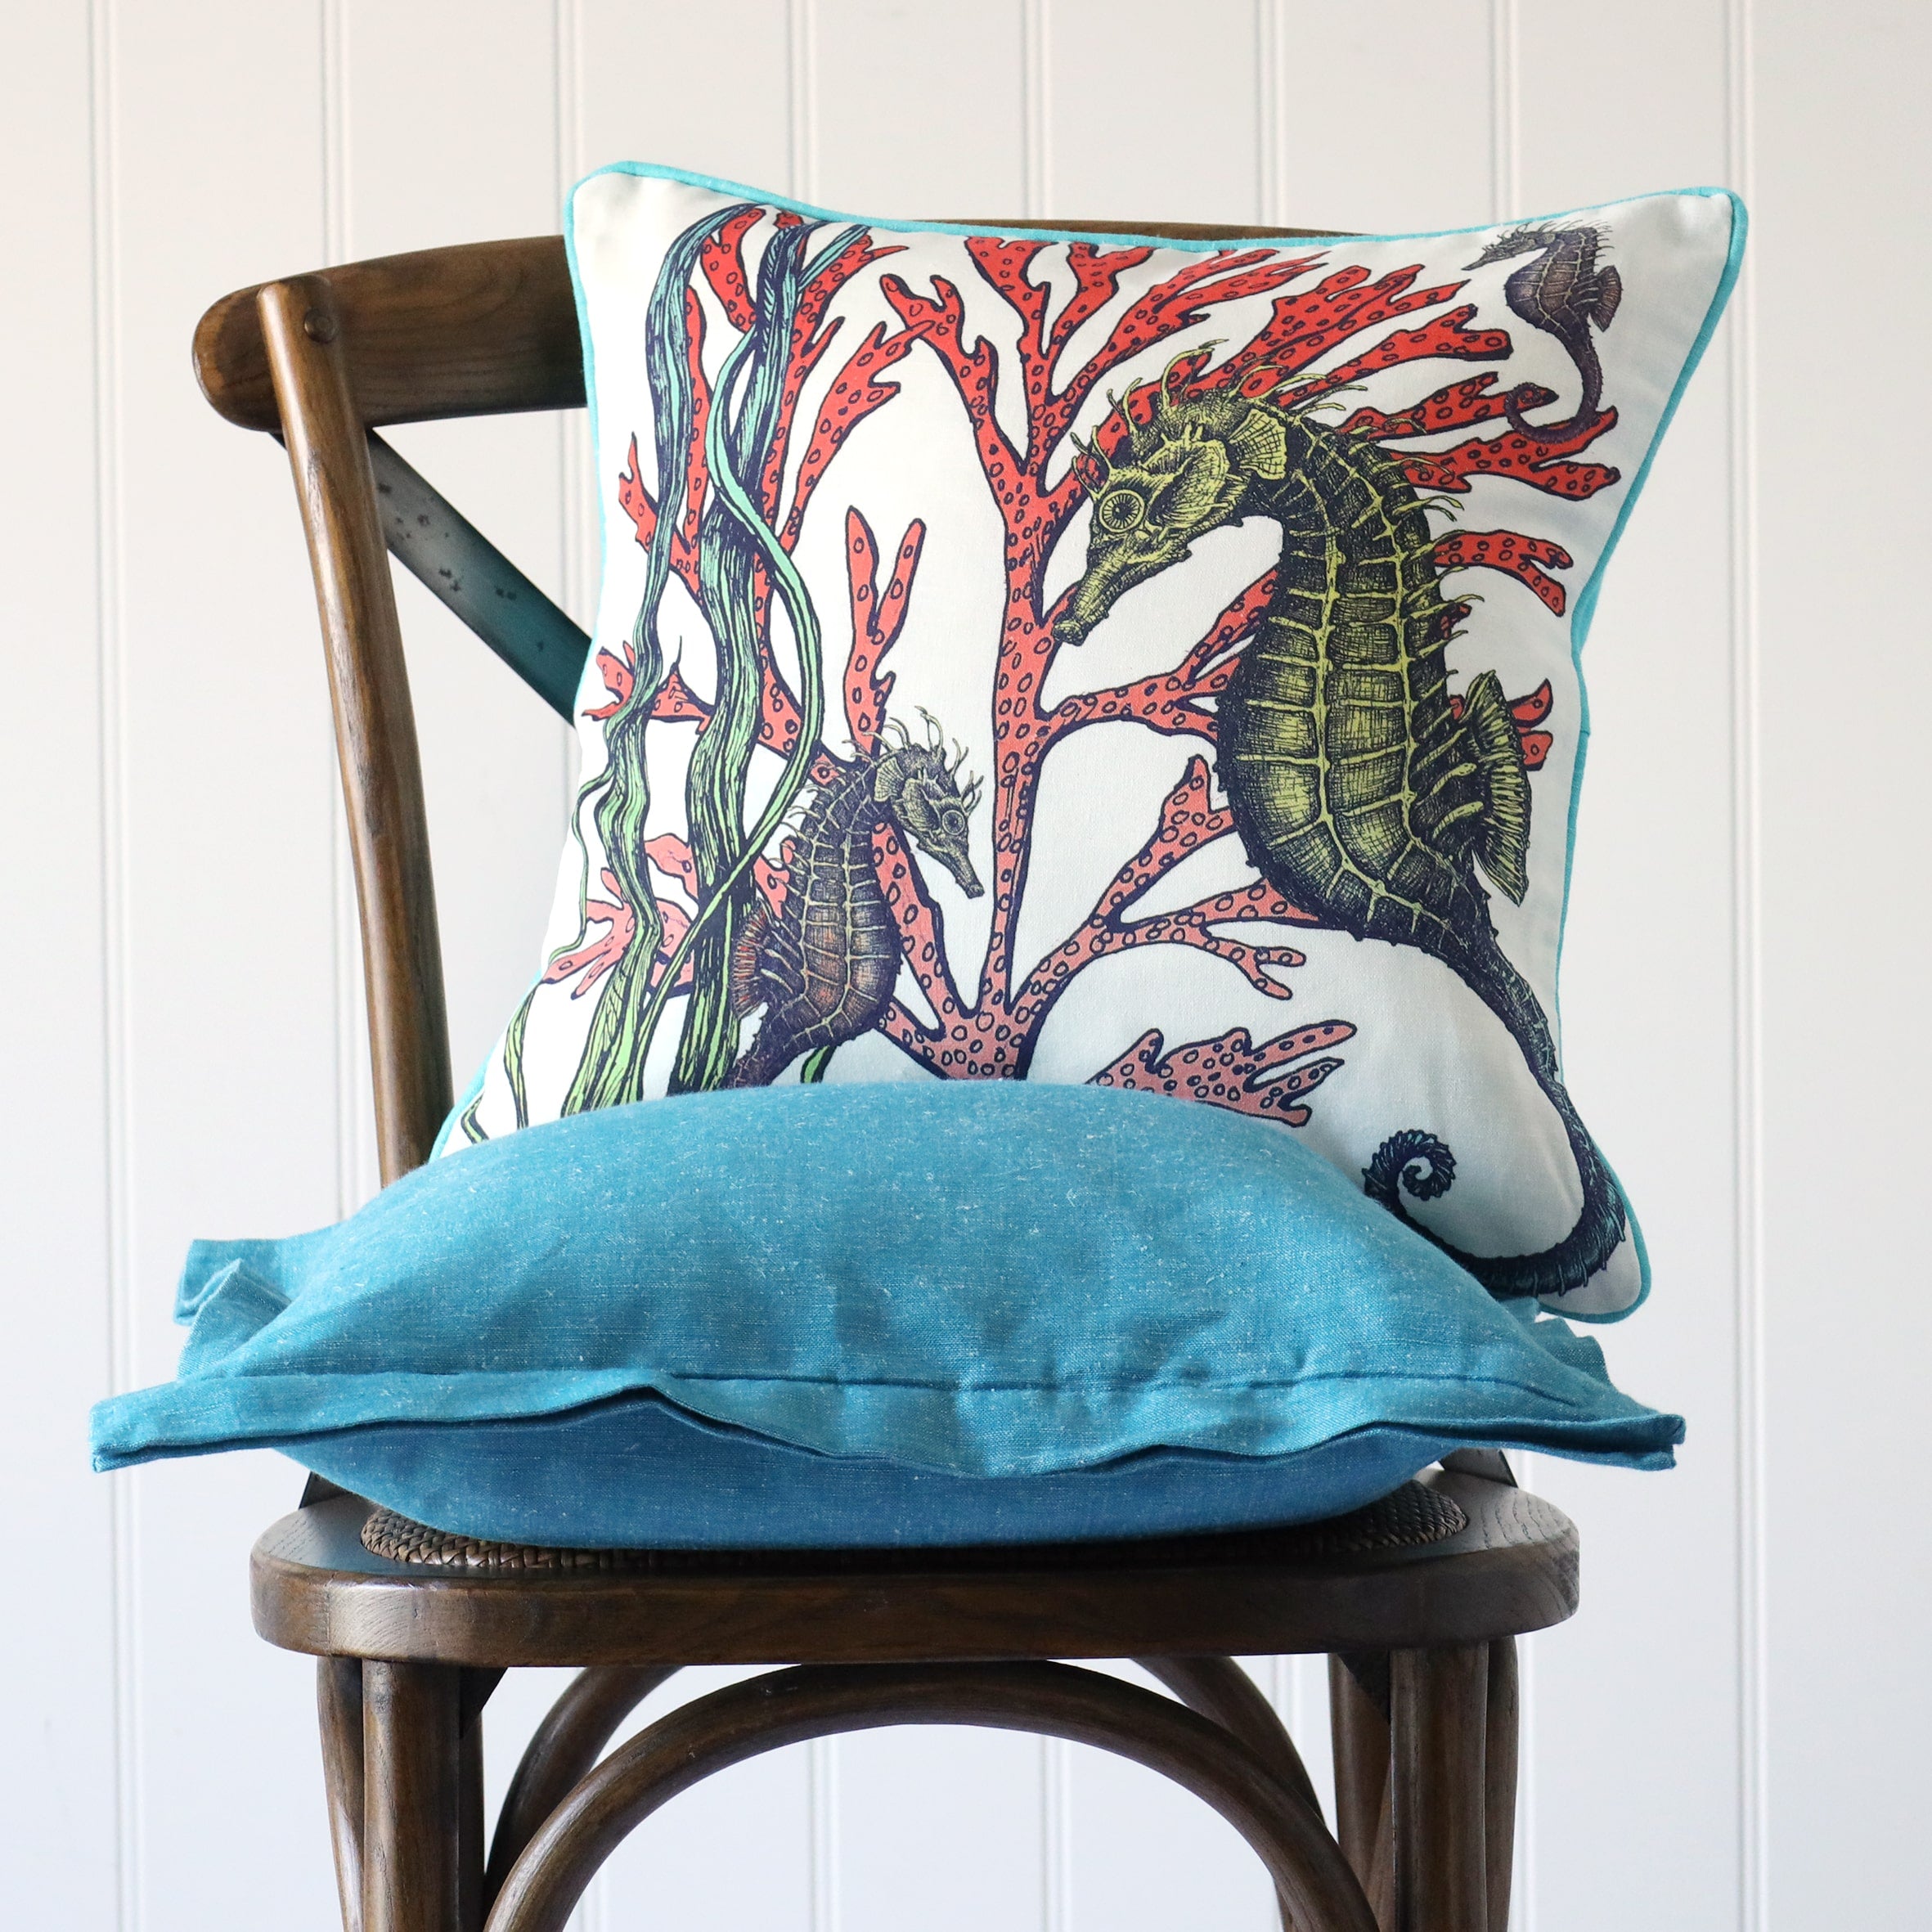 white cushion with brightly coloured illustration of seahorses and seaweeds on the front, placed on a turquoise linen cushion on a wooden chair